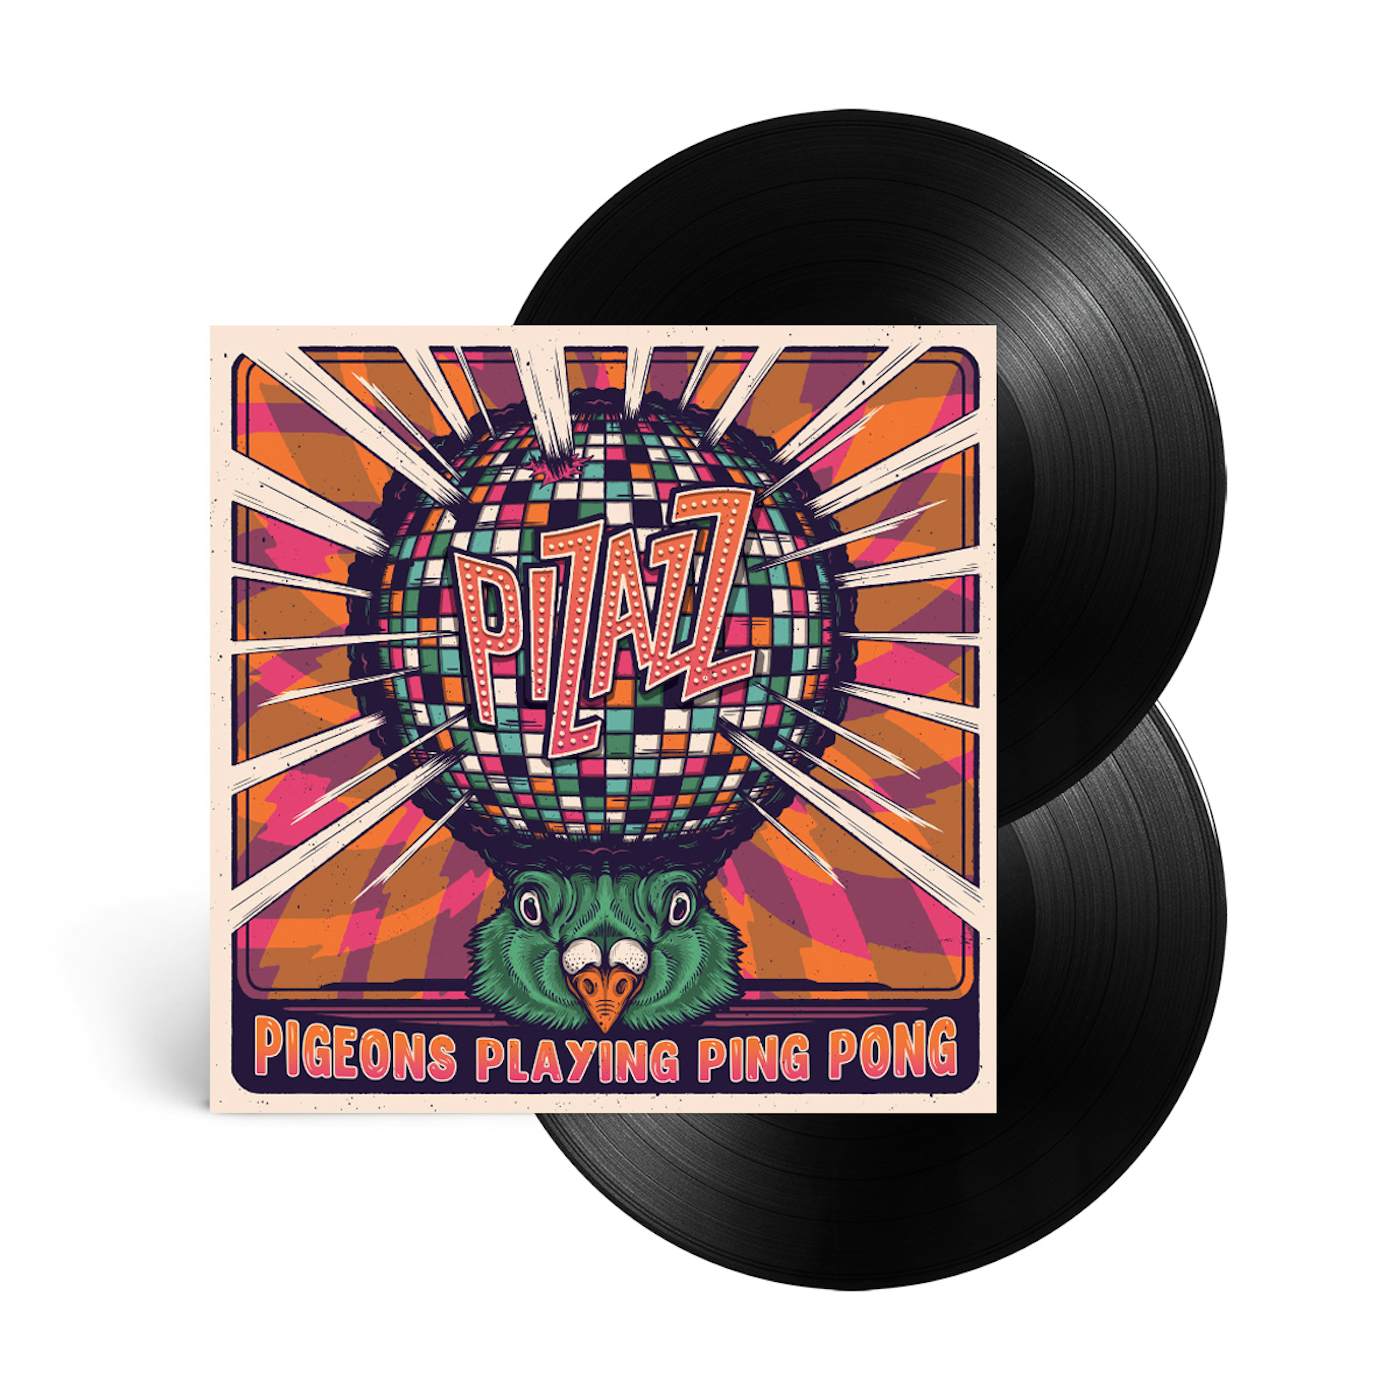 Pigeons Playing Ping Pong 'Pizazz' Double LP (2017) (Vinyl)